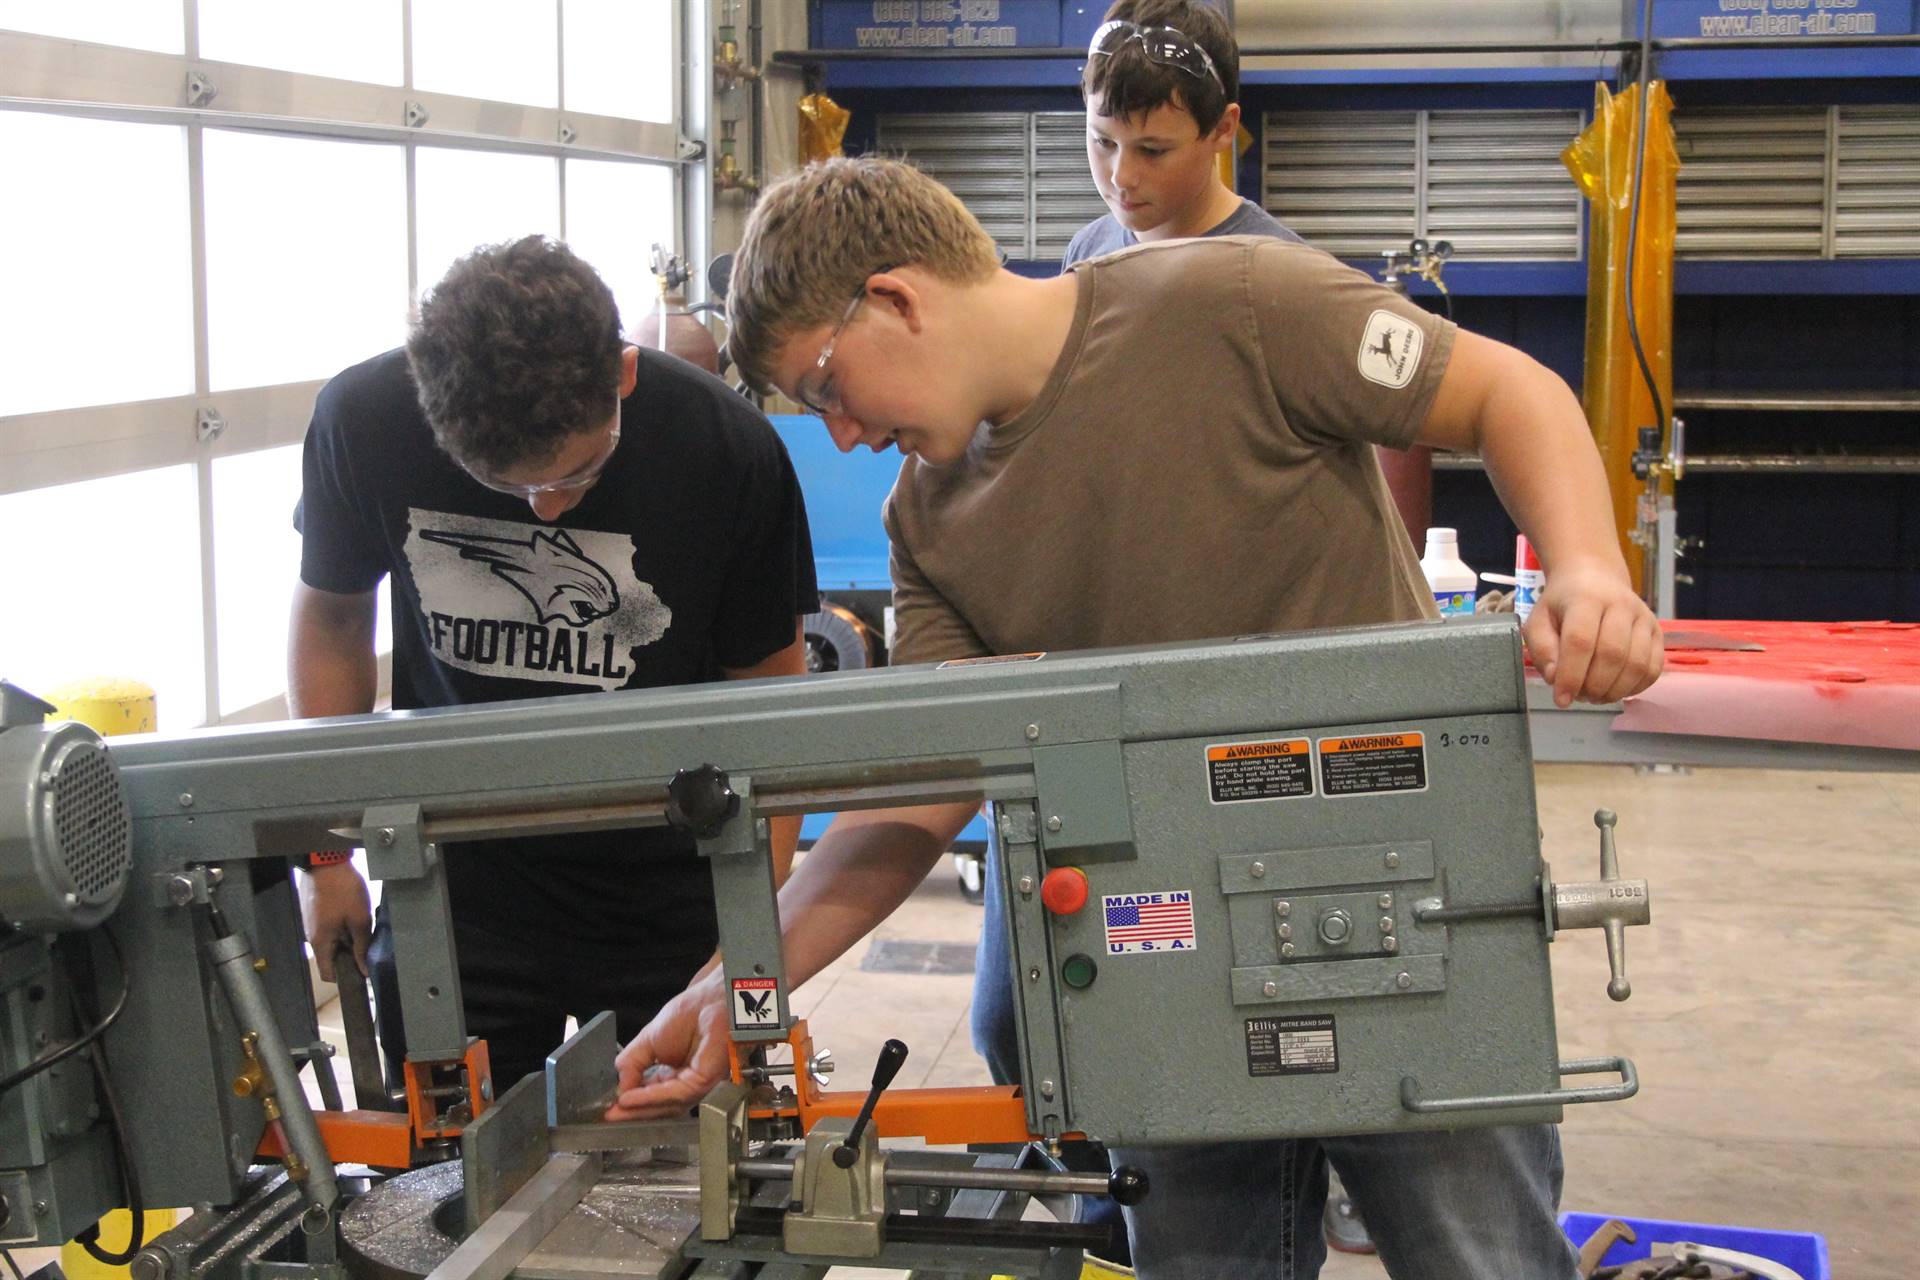 High school students working in vocational class